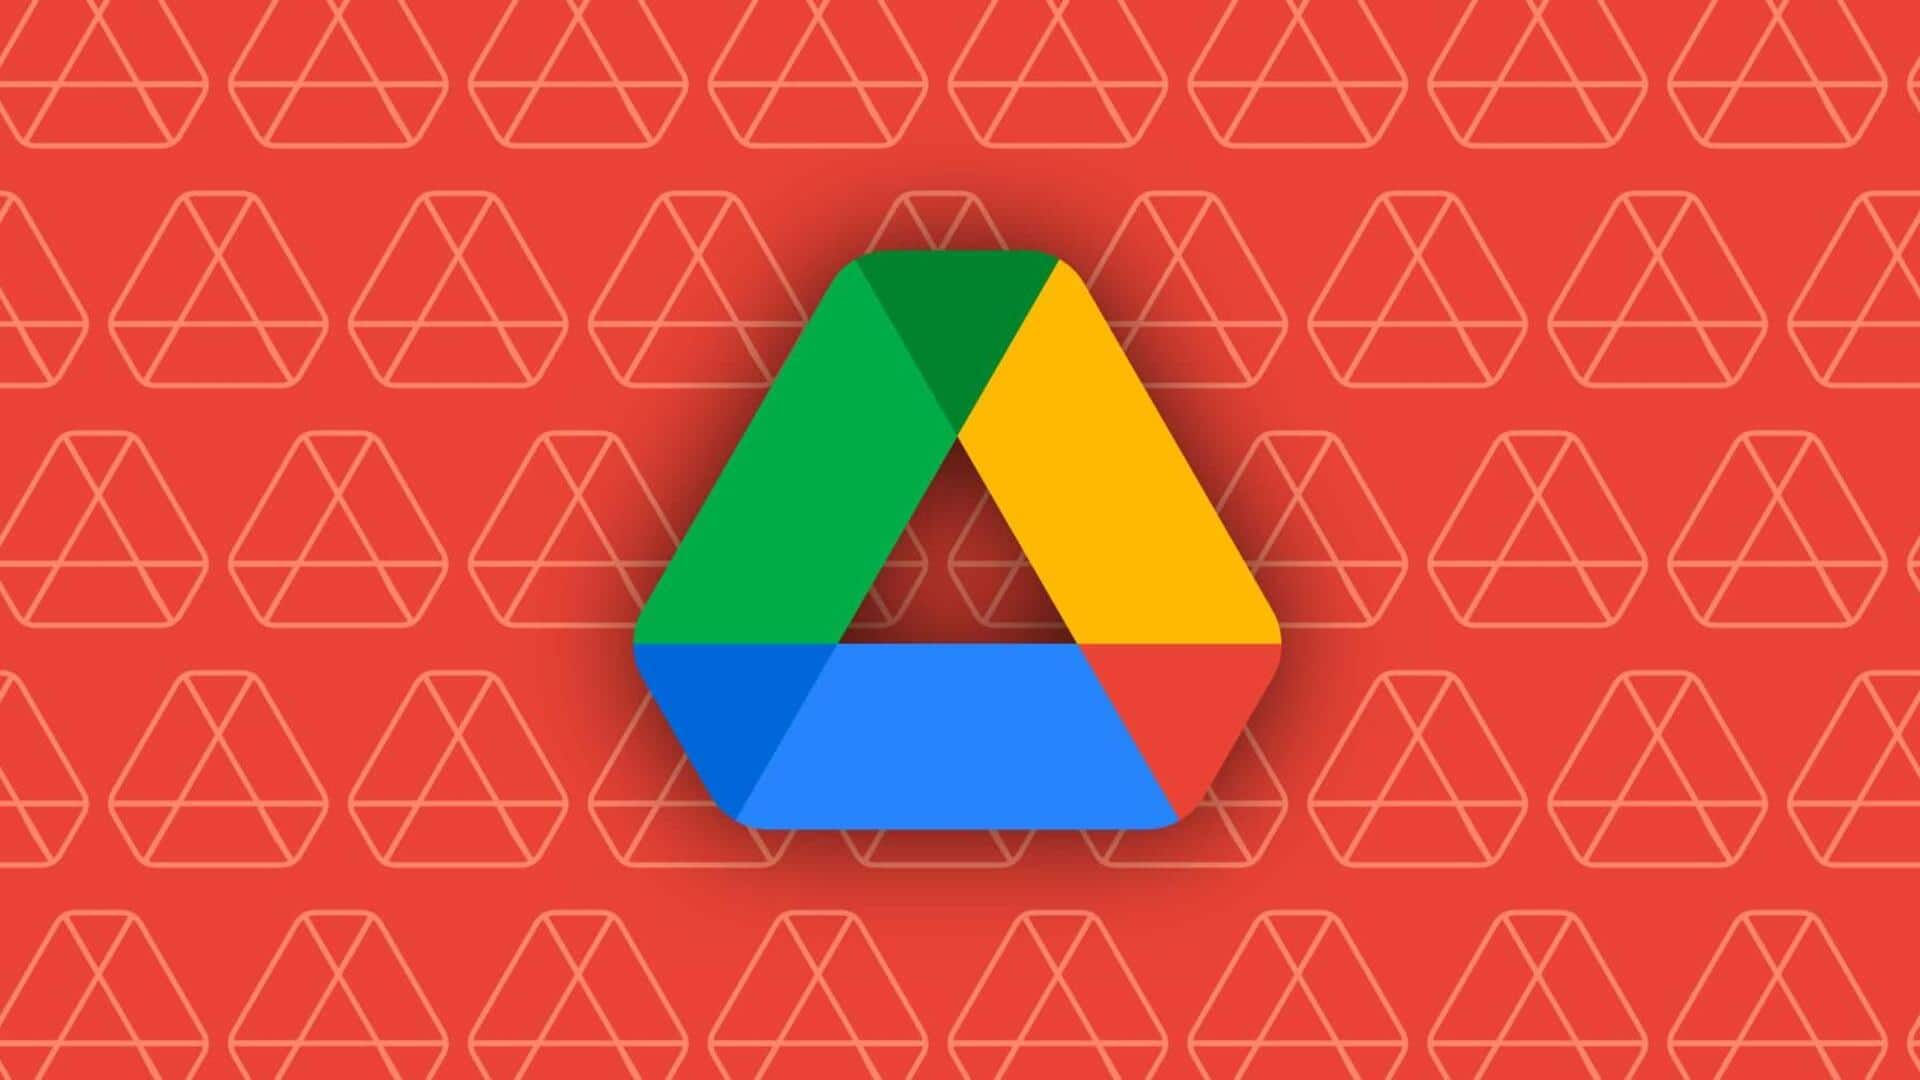 Google Drive introduces new homepage with personalized suggestions